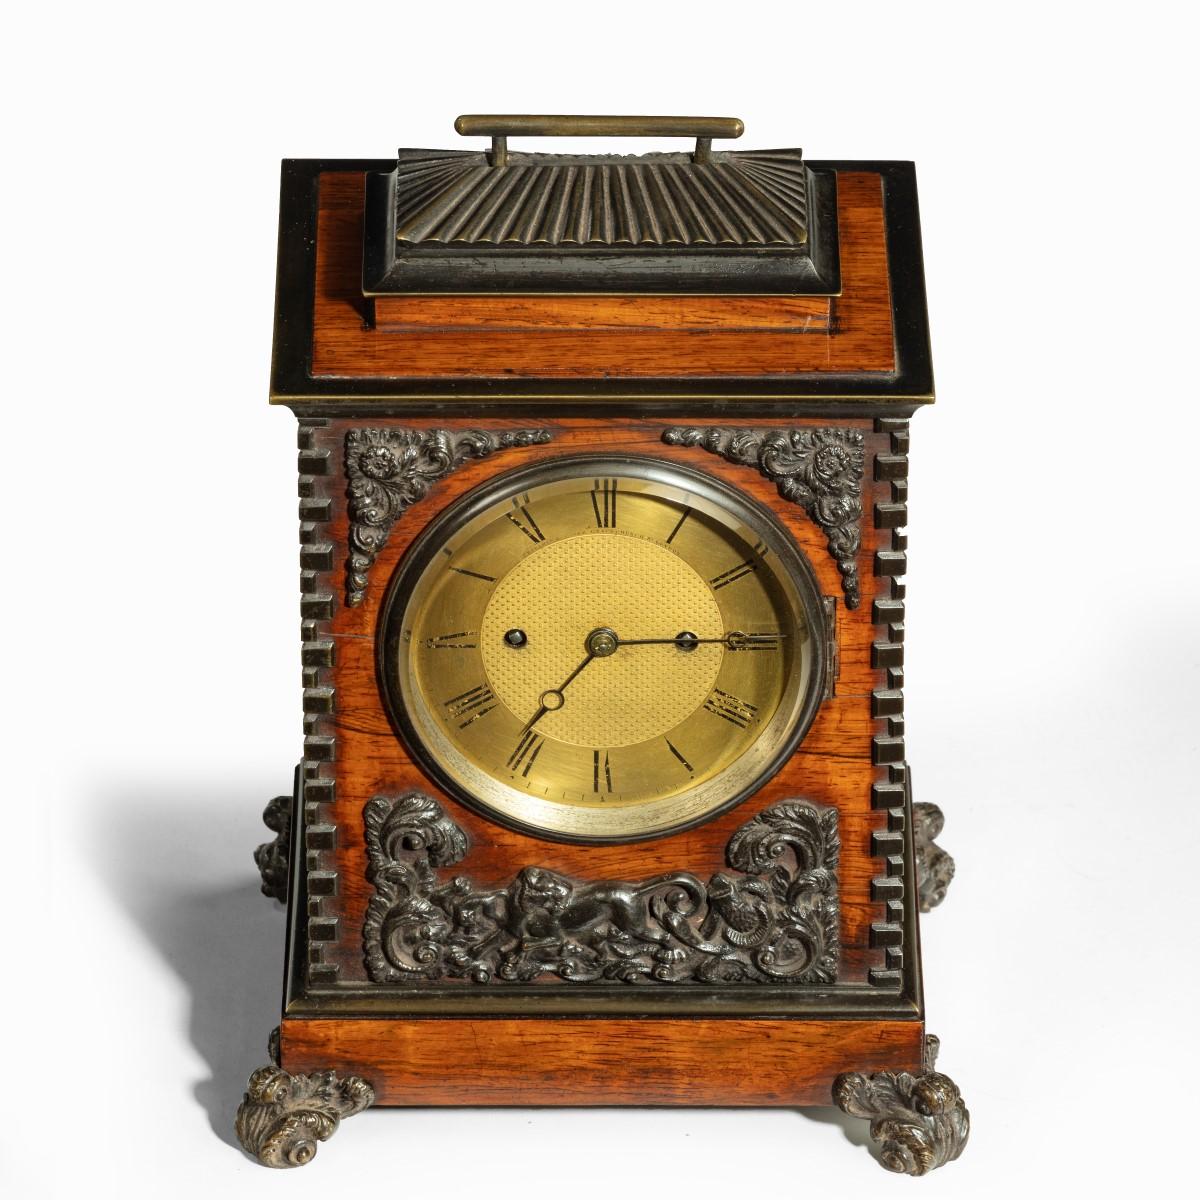 William IV rosewood and bronze bracket clock by Frodsham 185 & Baker, the brass eight-day movement striking on a bell, the backplate numbered ‘292’, the circular brass dial with roman numerals and an engine turned centre, signed ‘Frodsham & Baker